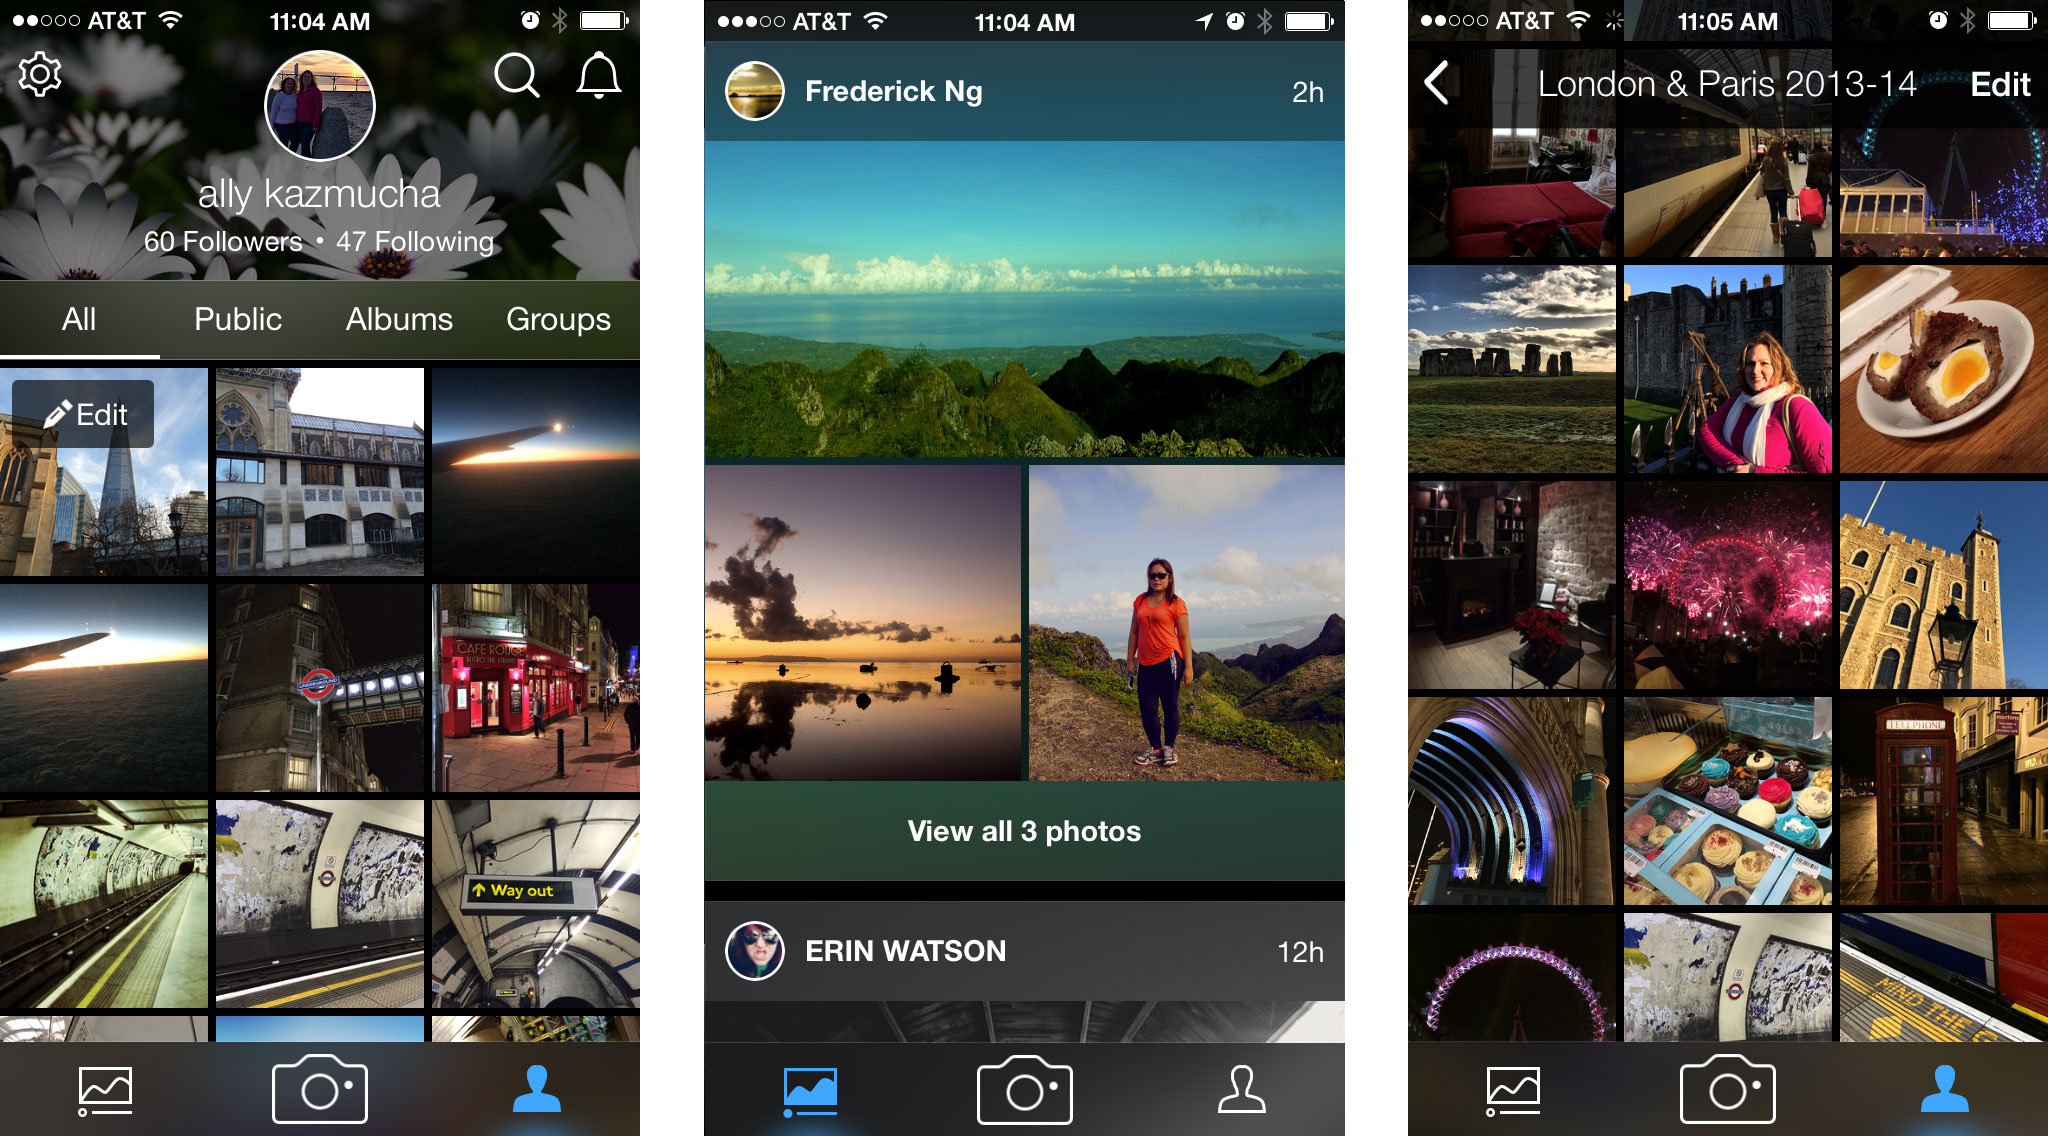 Best photo and video storage apps for iPhone and iPad: Flickr